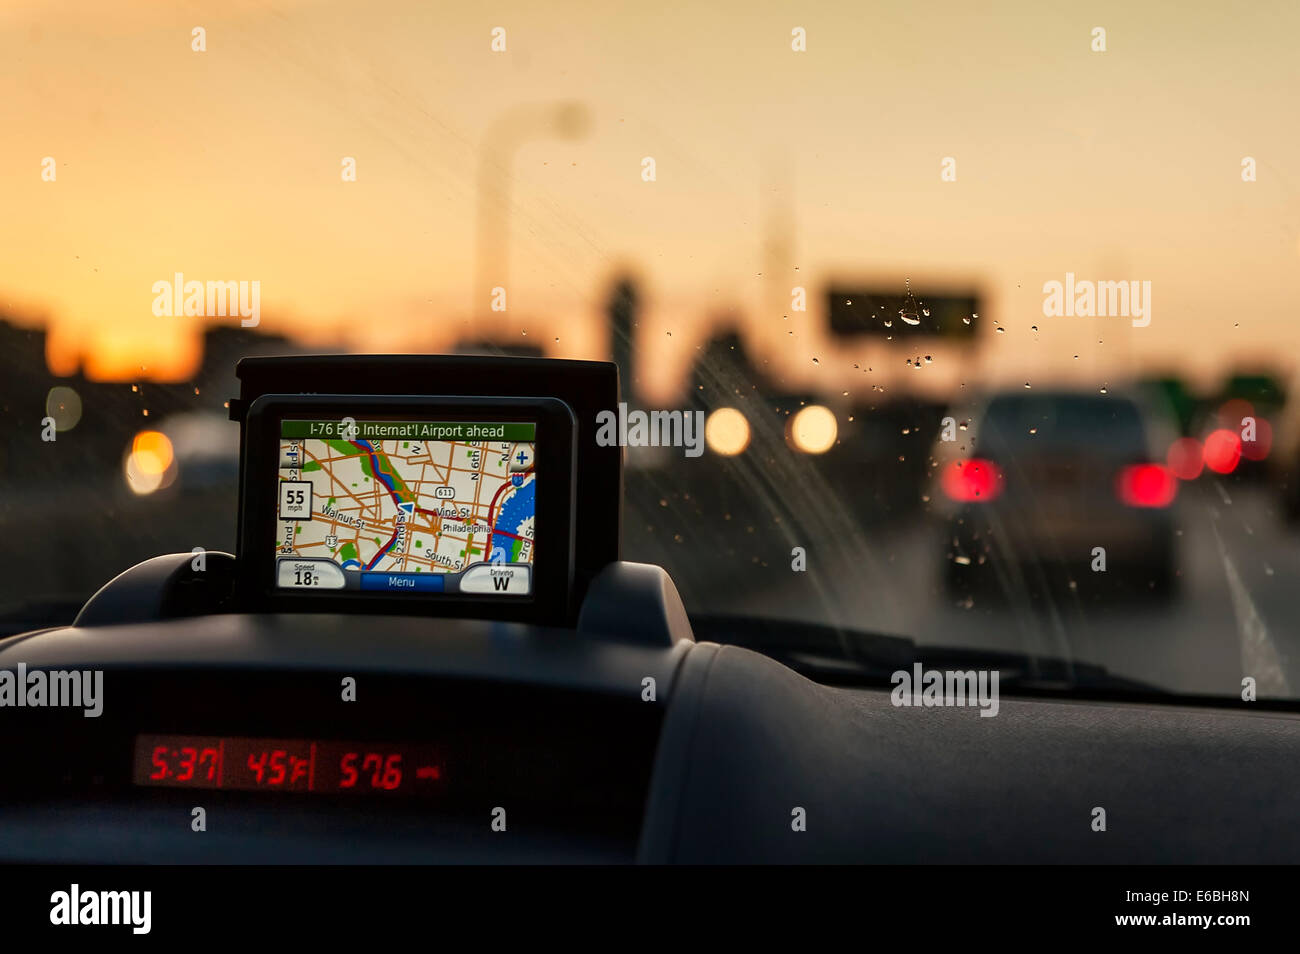 GPS unit on the dashboard of a car. Stock Photo